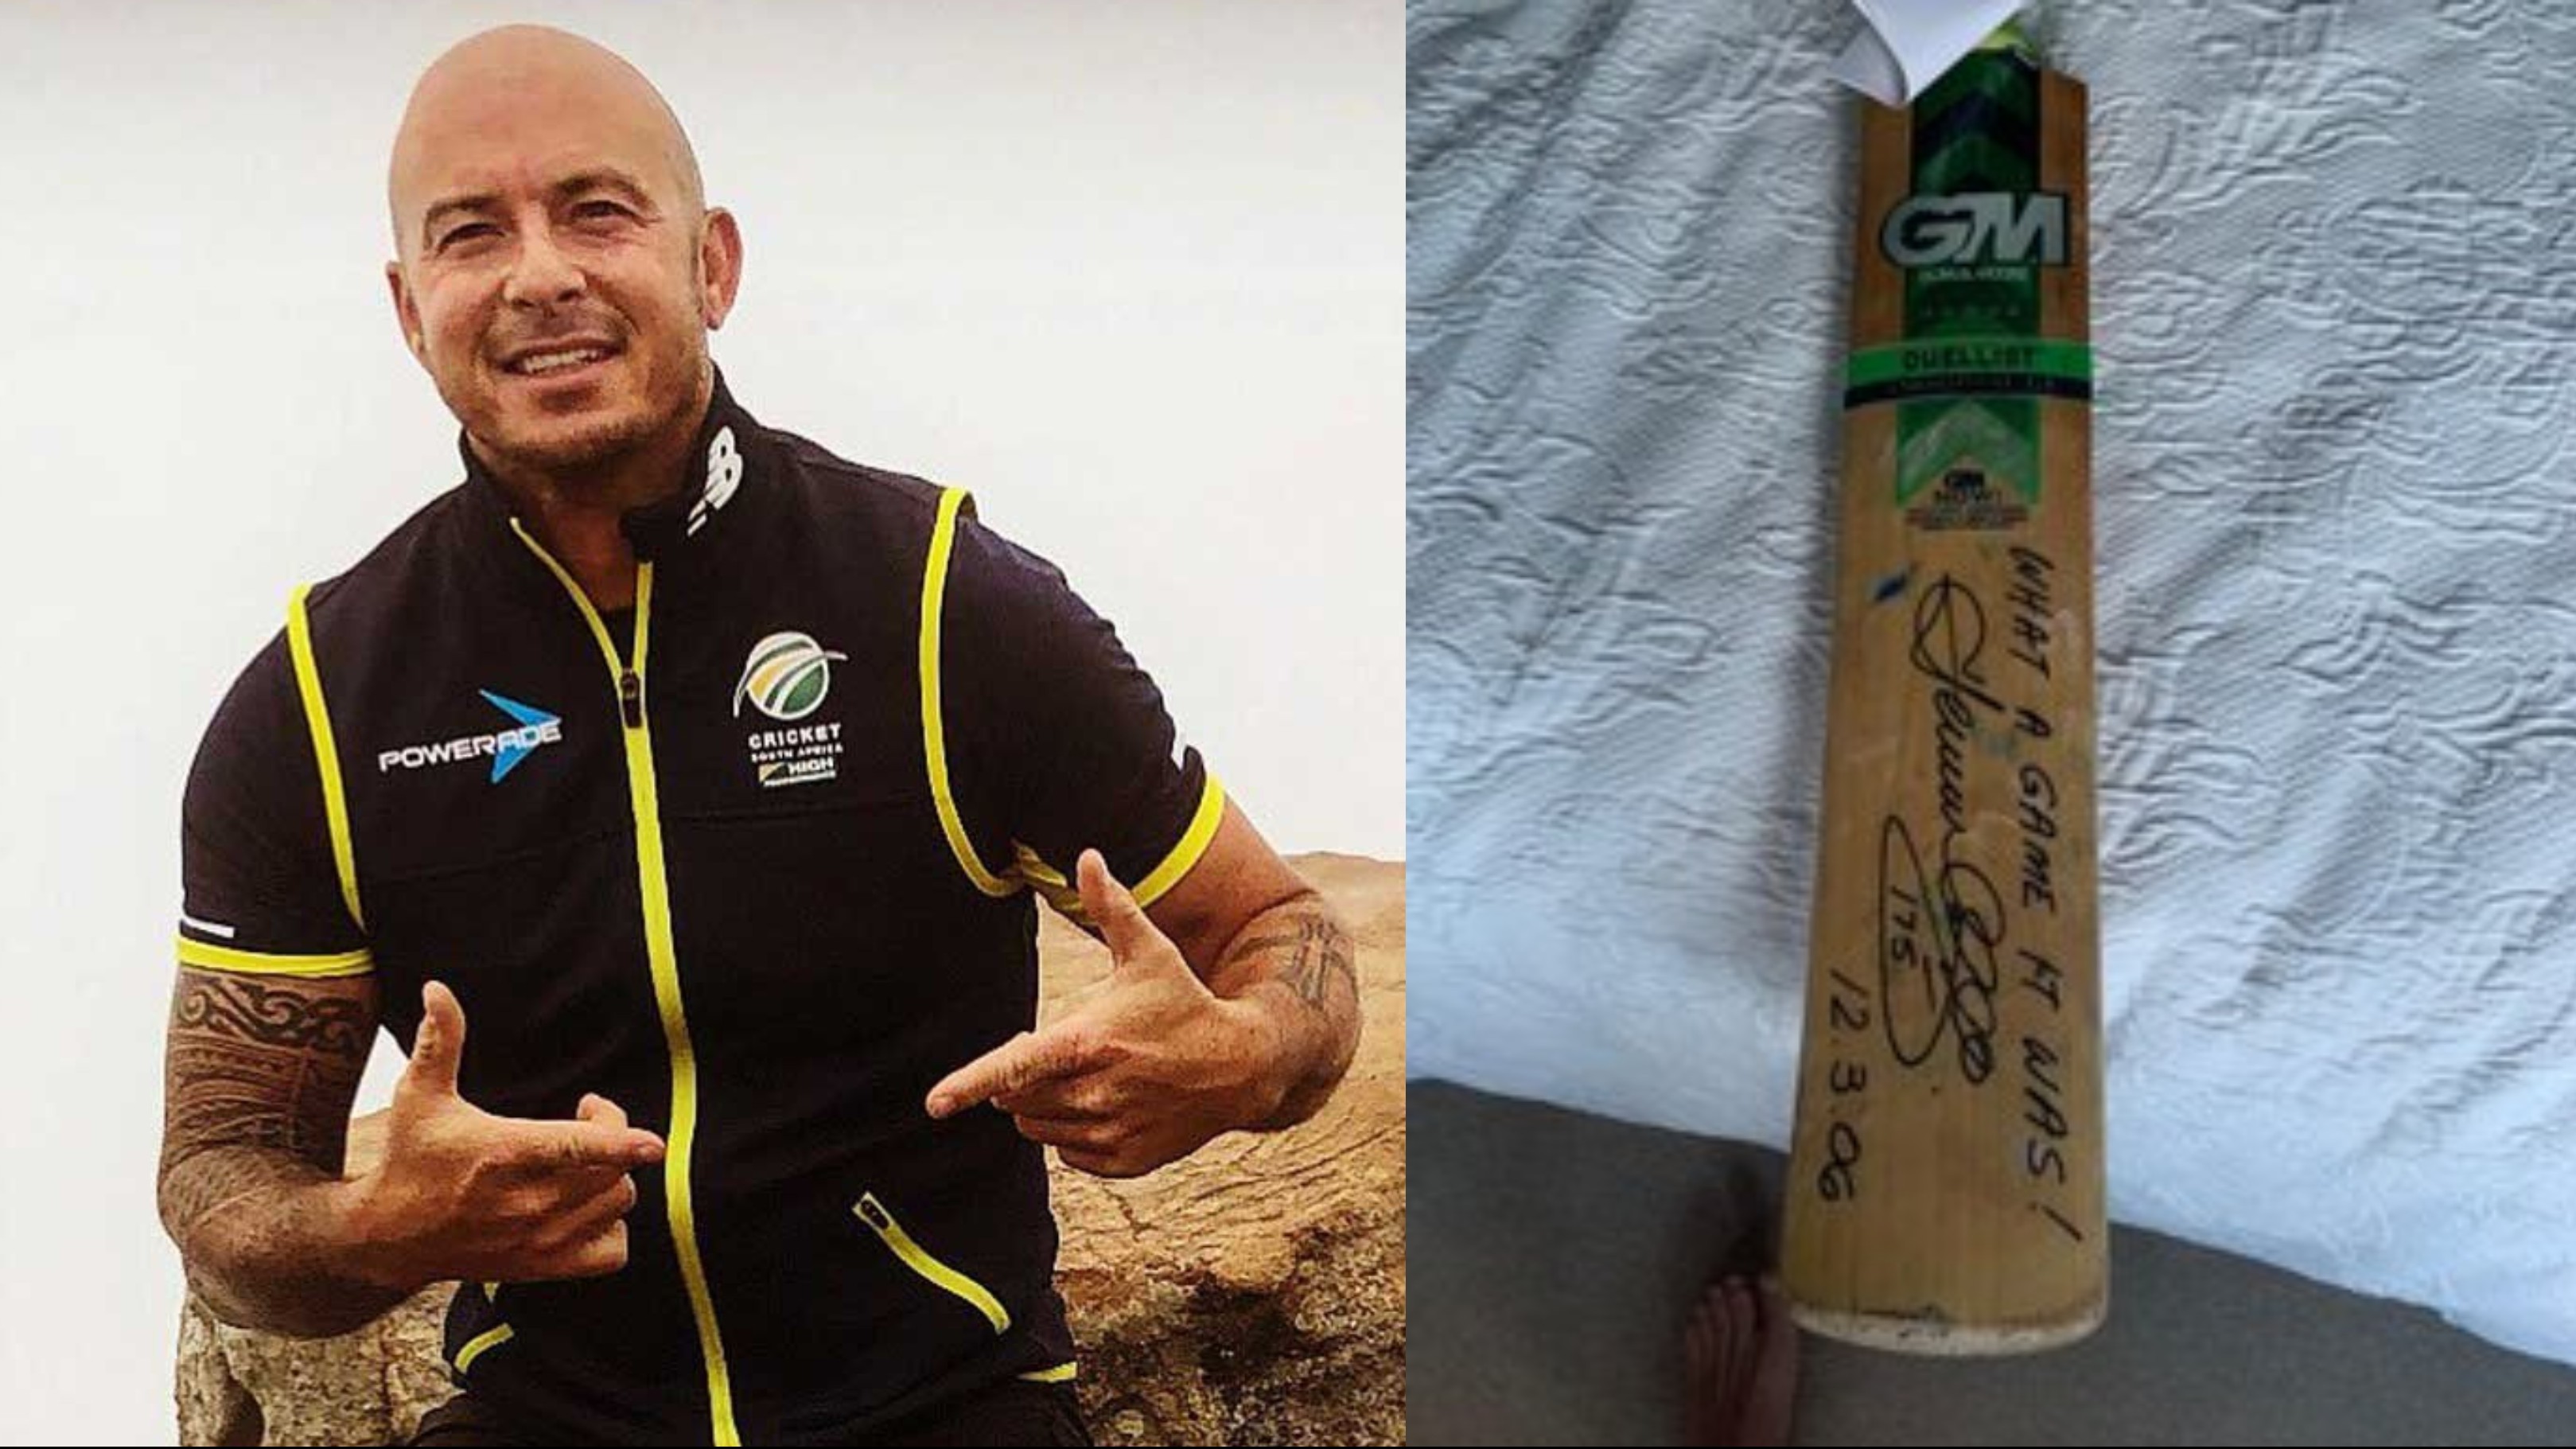 Herschelle Gibbs to auction the bat he used in South Africa's historic run-chase to aid fight against COVID-19